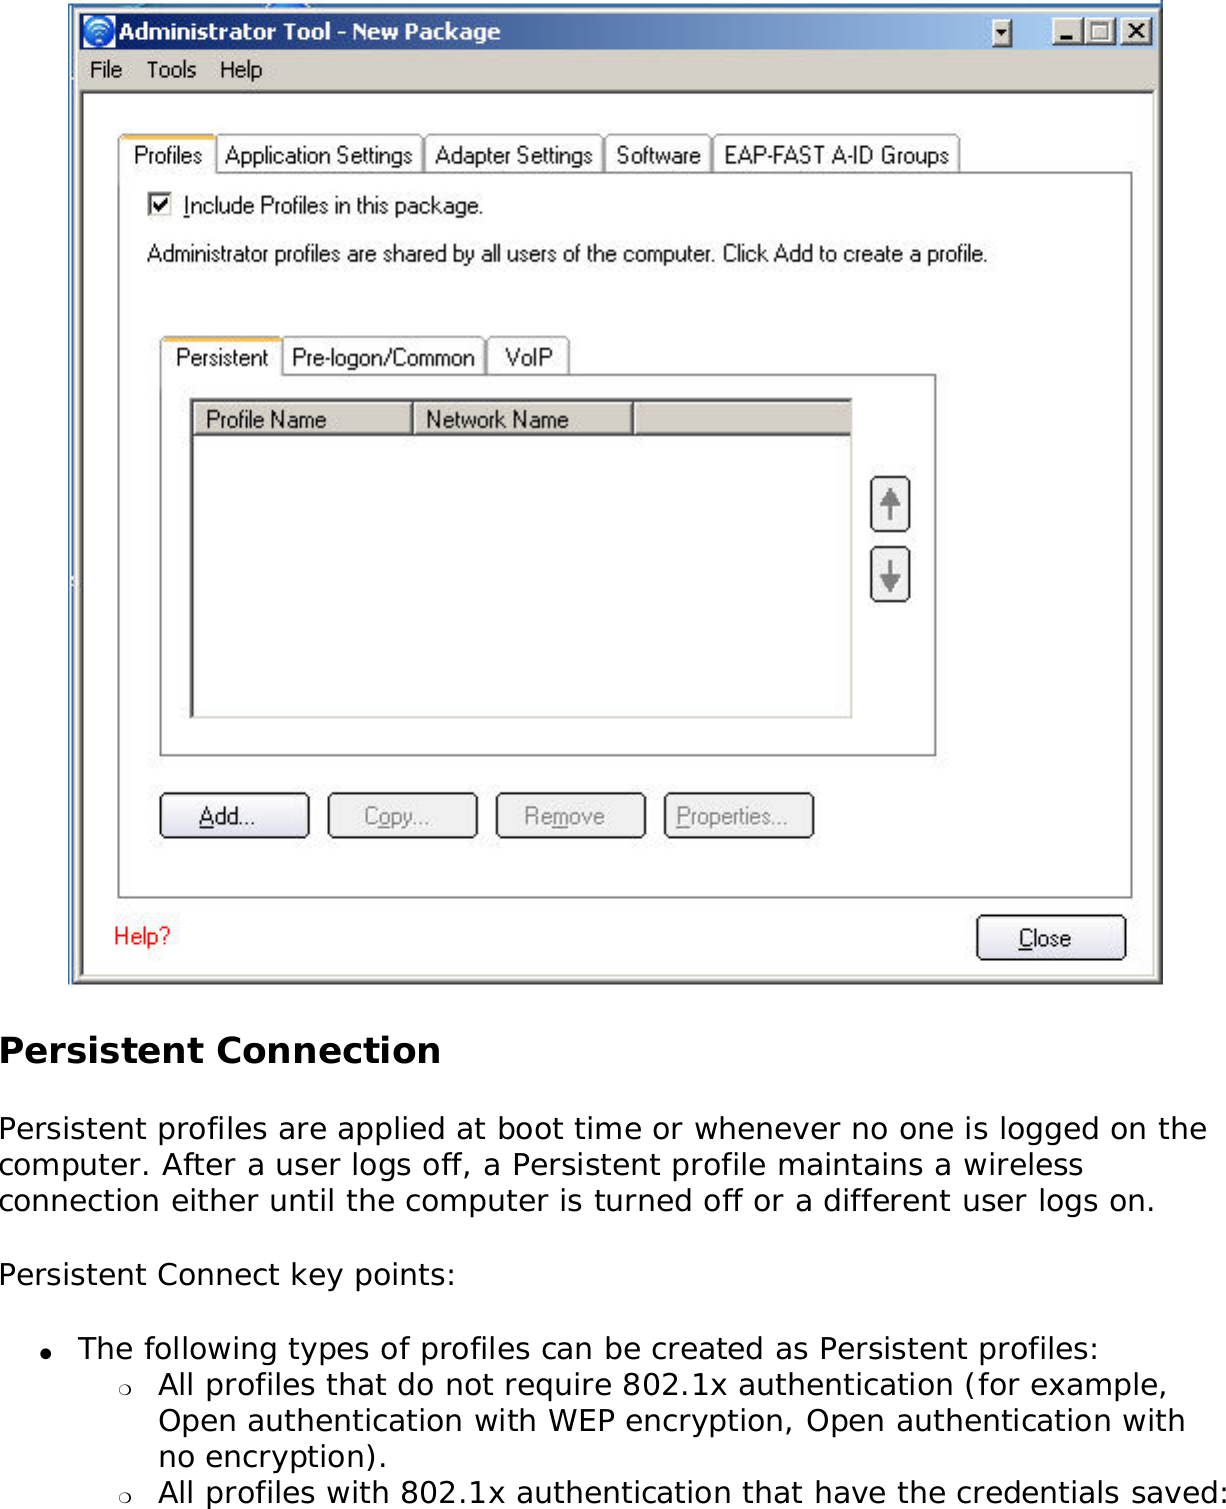  Persistent Connection Persistent profiles are applied at boot time or whenever no one is logged on the computer. After a user logs off, a Persistent profile maintains a wireless connection either until the computer is turned off or a different user logs on. Persistent Connect key points: ●     The following types of profiles can be created as Persistent profiles: ❍     All profiles that do not require 802.1x authentication (for example, Open authentication with WEP encryption, Open authentication with no encryption).❍     All profiles with 802.1x authentication that have the credentials saved: 